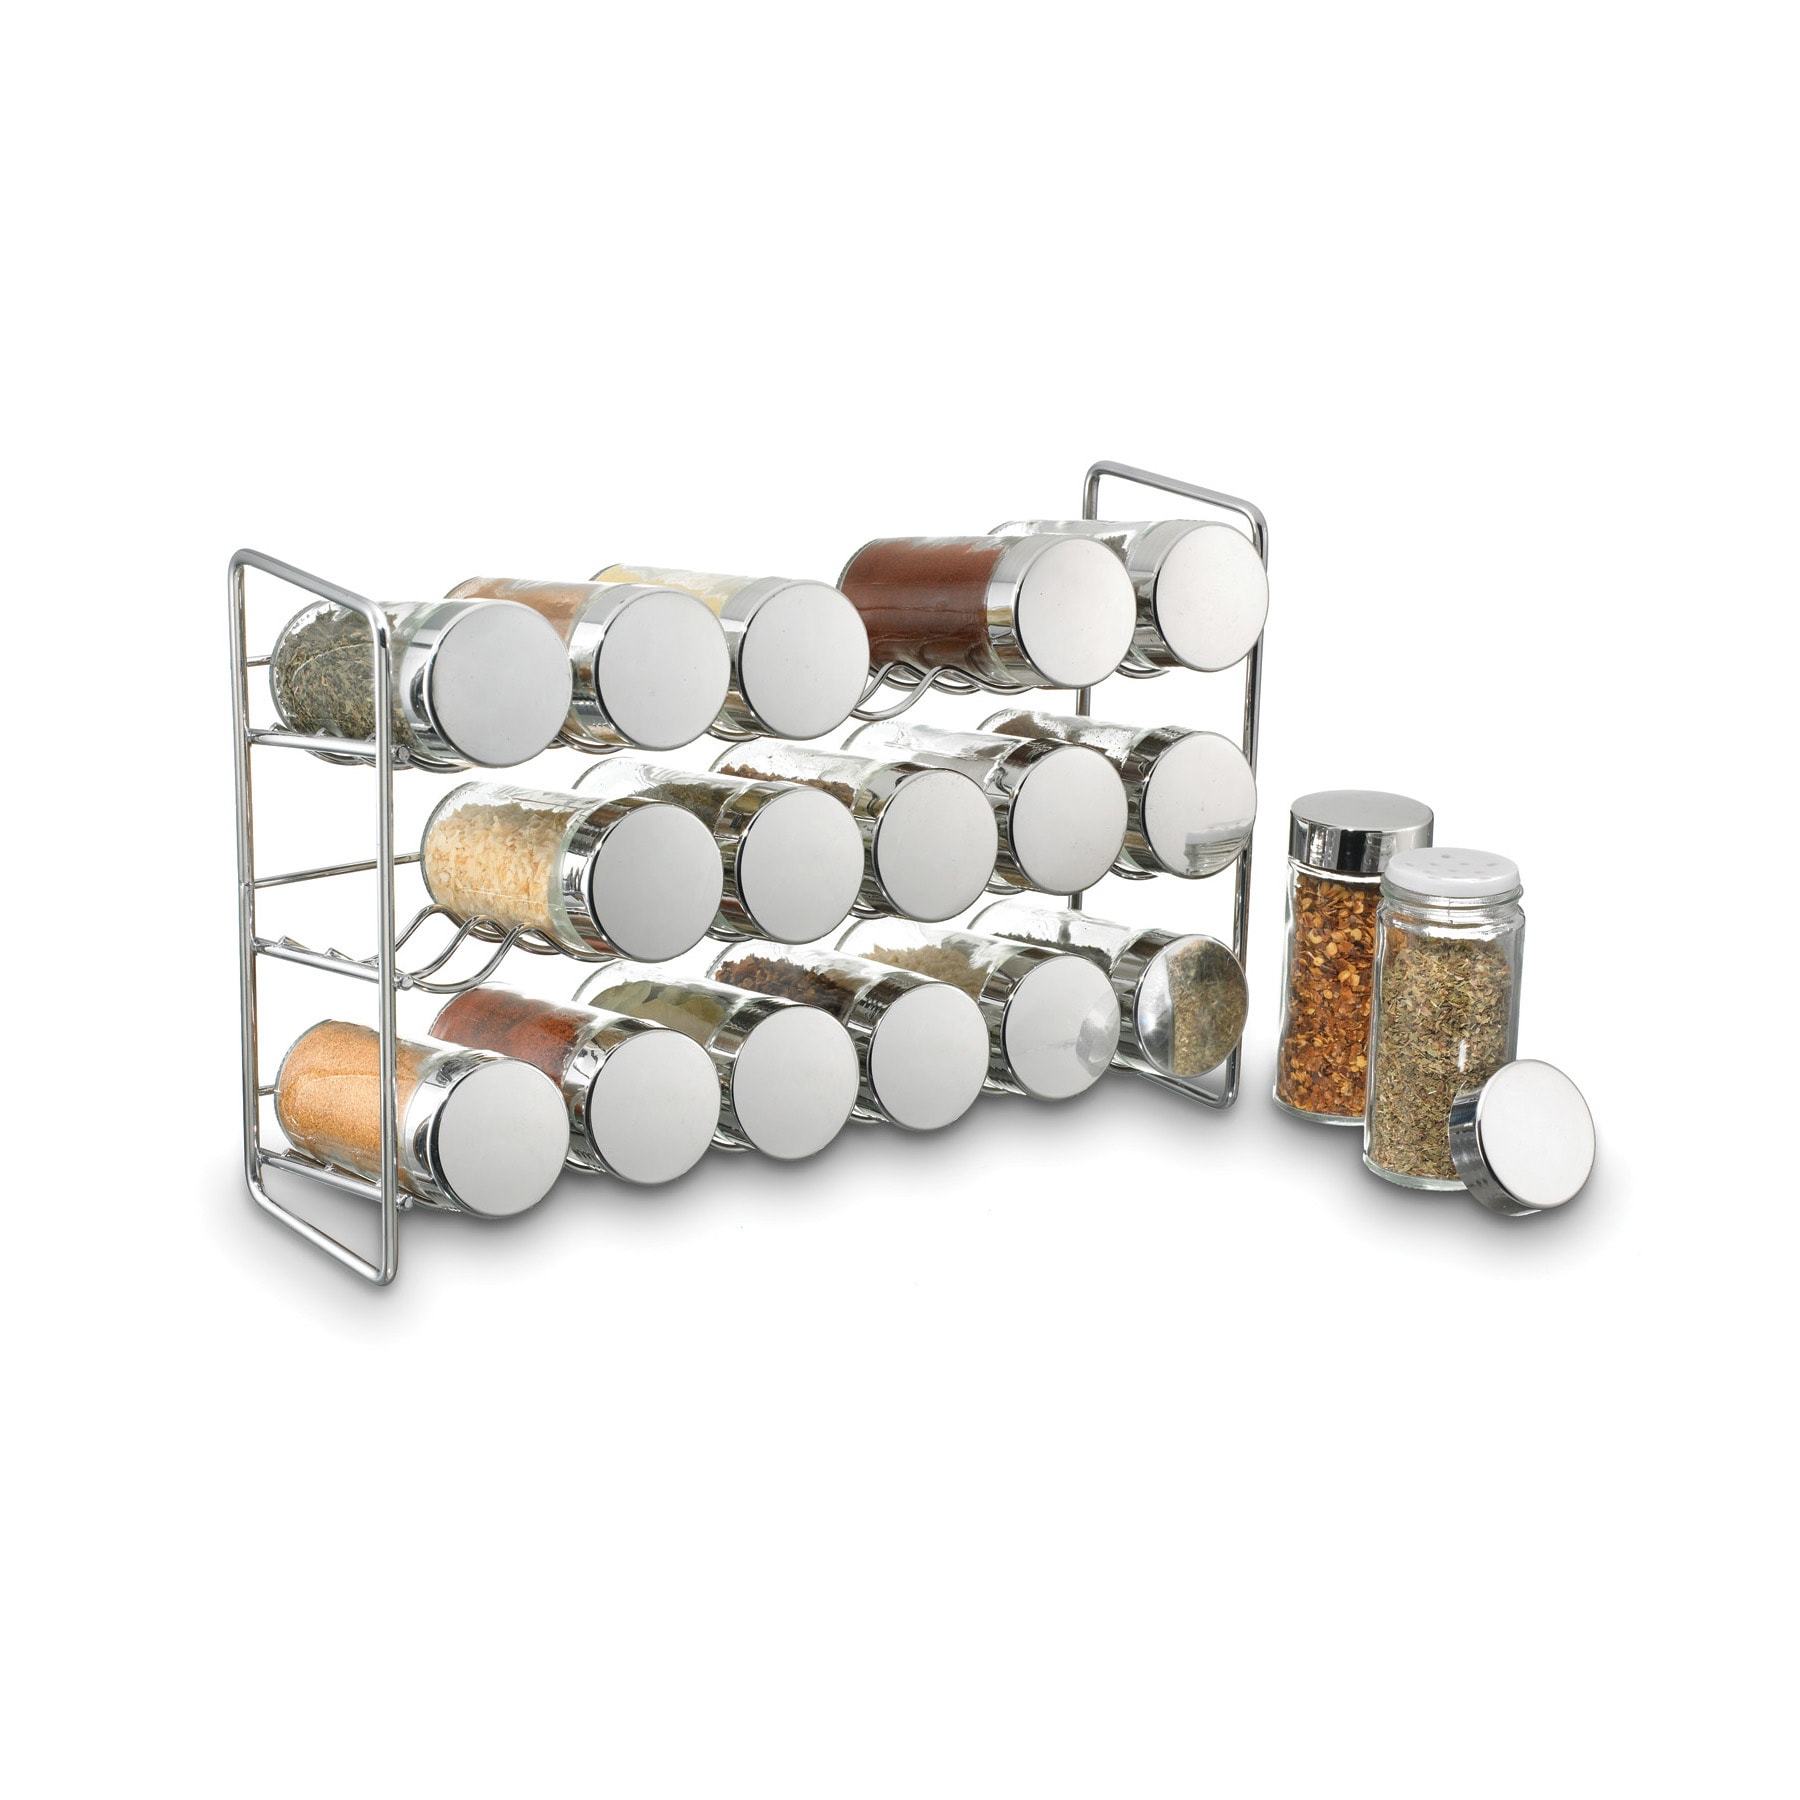 11-in W x 7.5-in H 3-Tier Freestanding Metal Spice Rack in Chrome | - Style Selections 5429-05LW